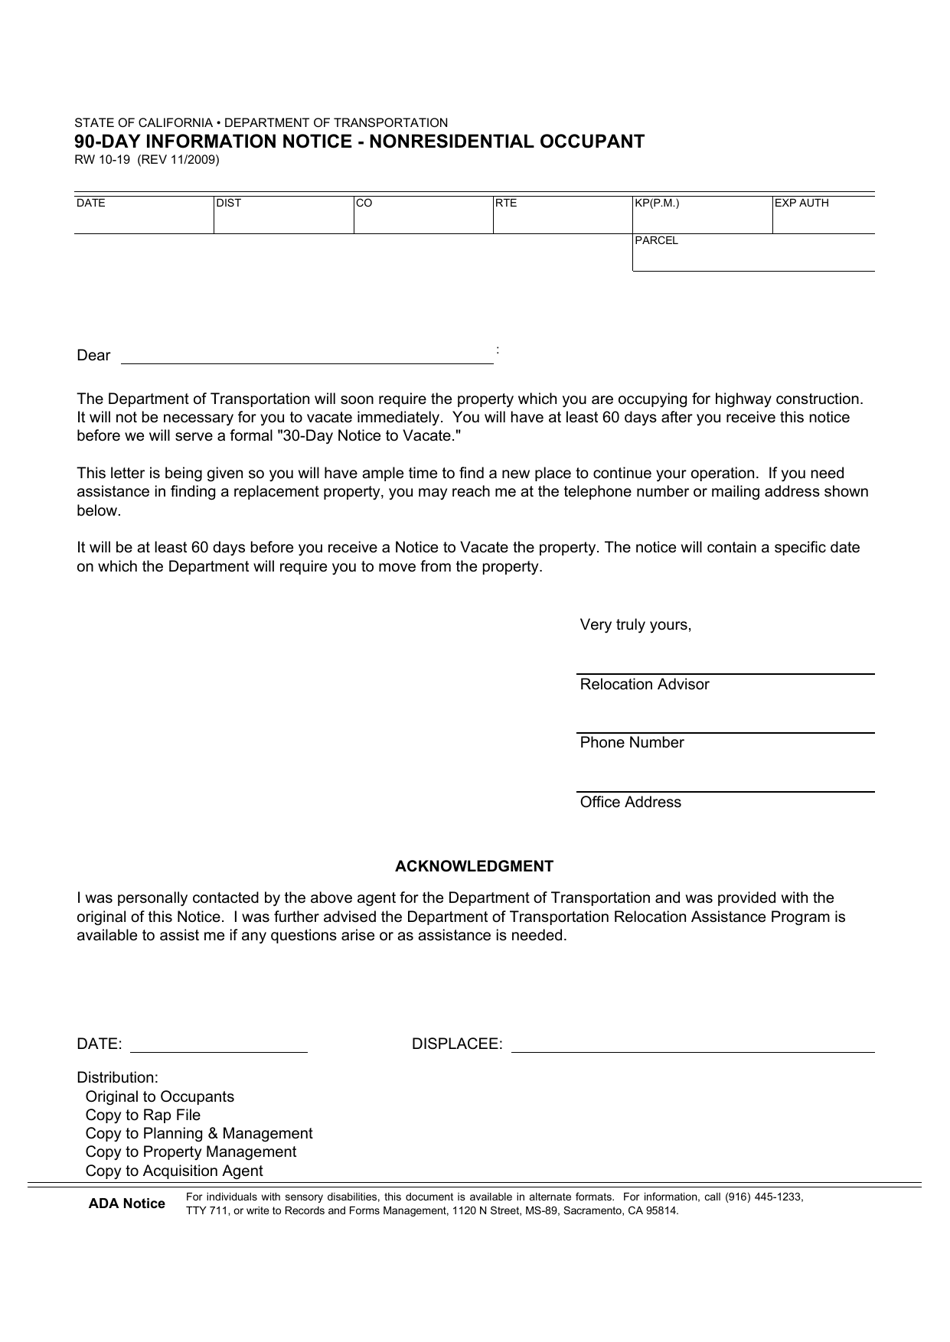 Form RW10-19 90-day Information Notice - Nonresidential Occupant - California, Page 1